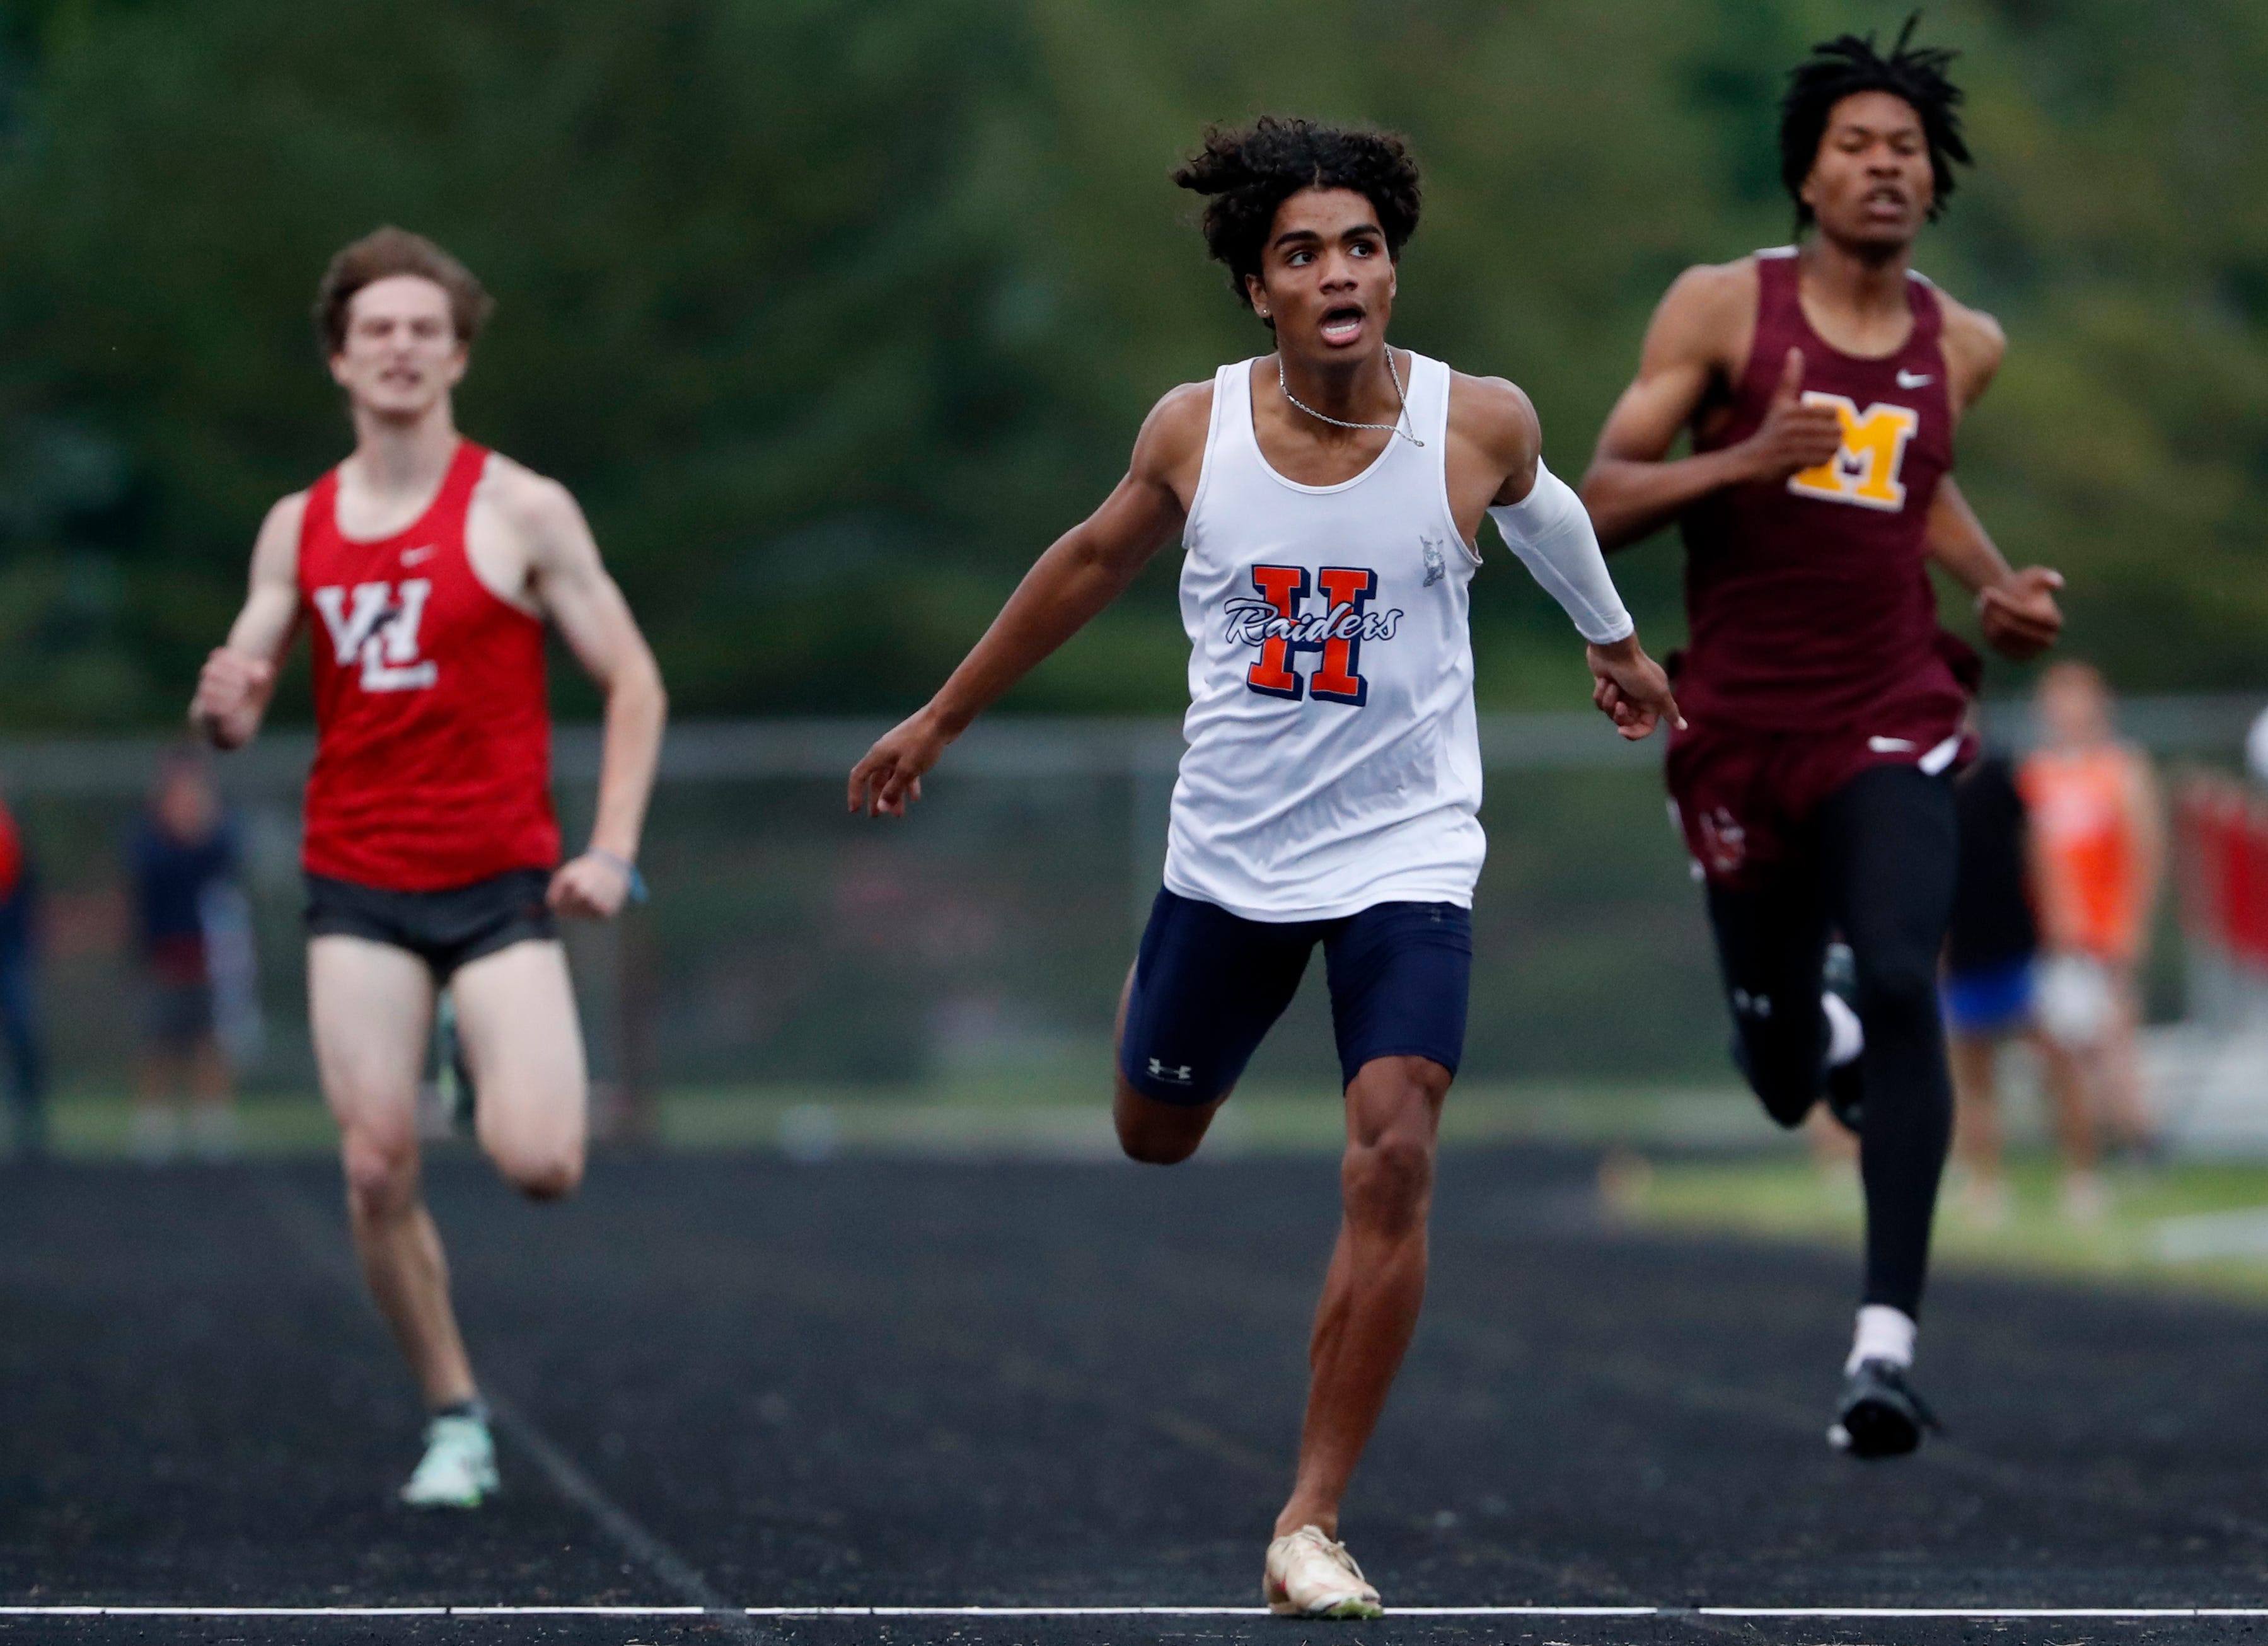 Four takeaways from boys track and field sectional championship